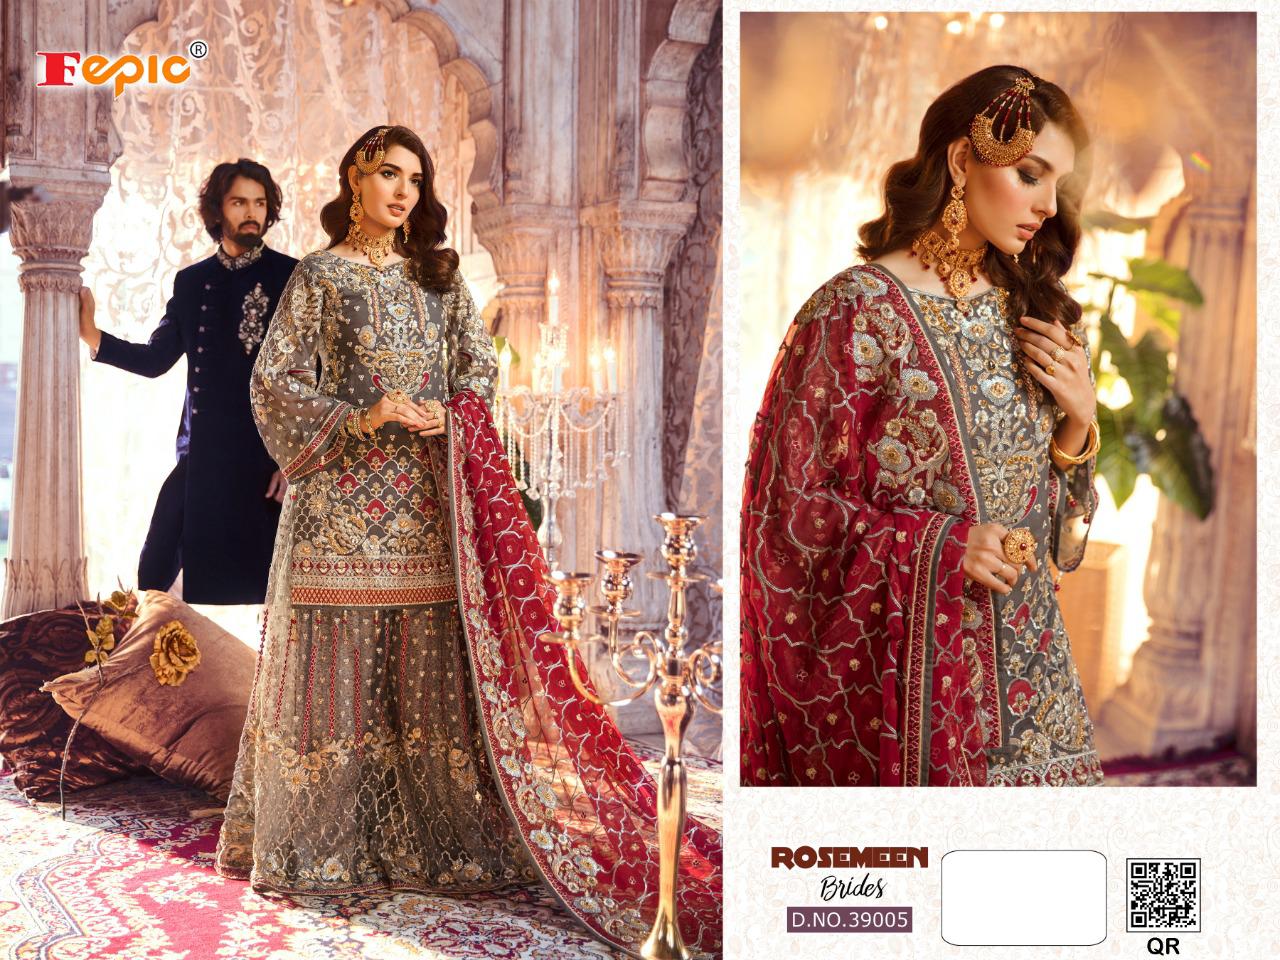 fepic rosemeen brides georgette innovative style sharara style catalog